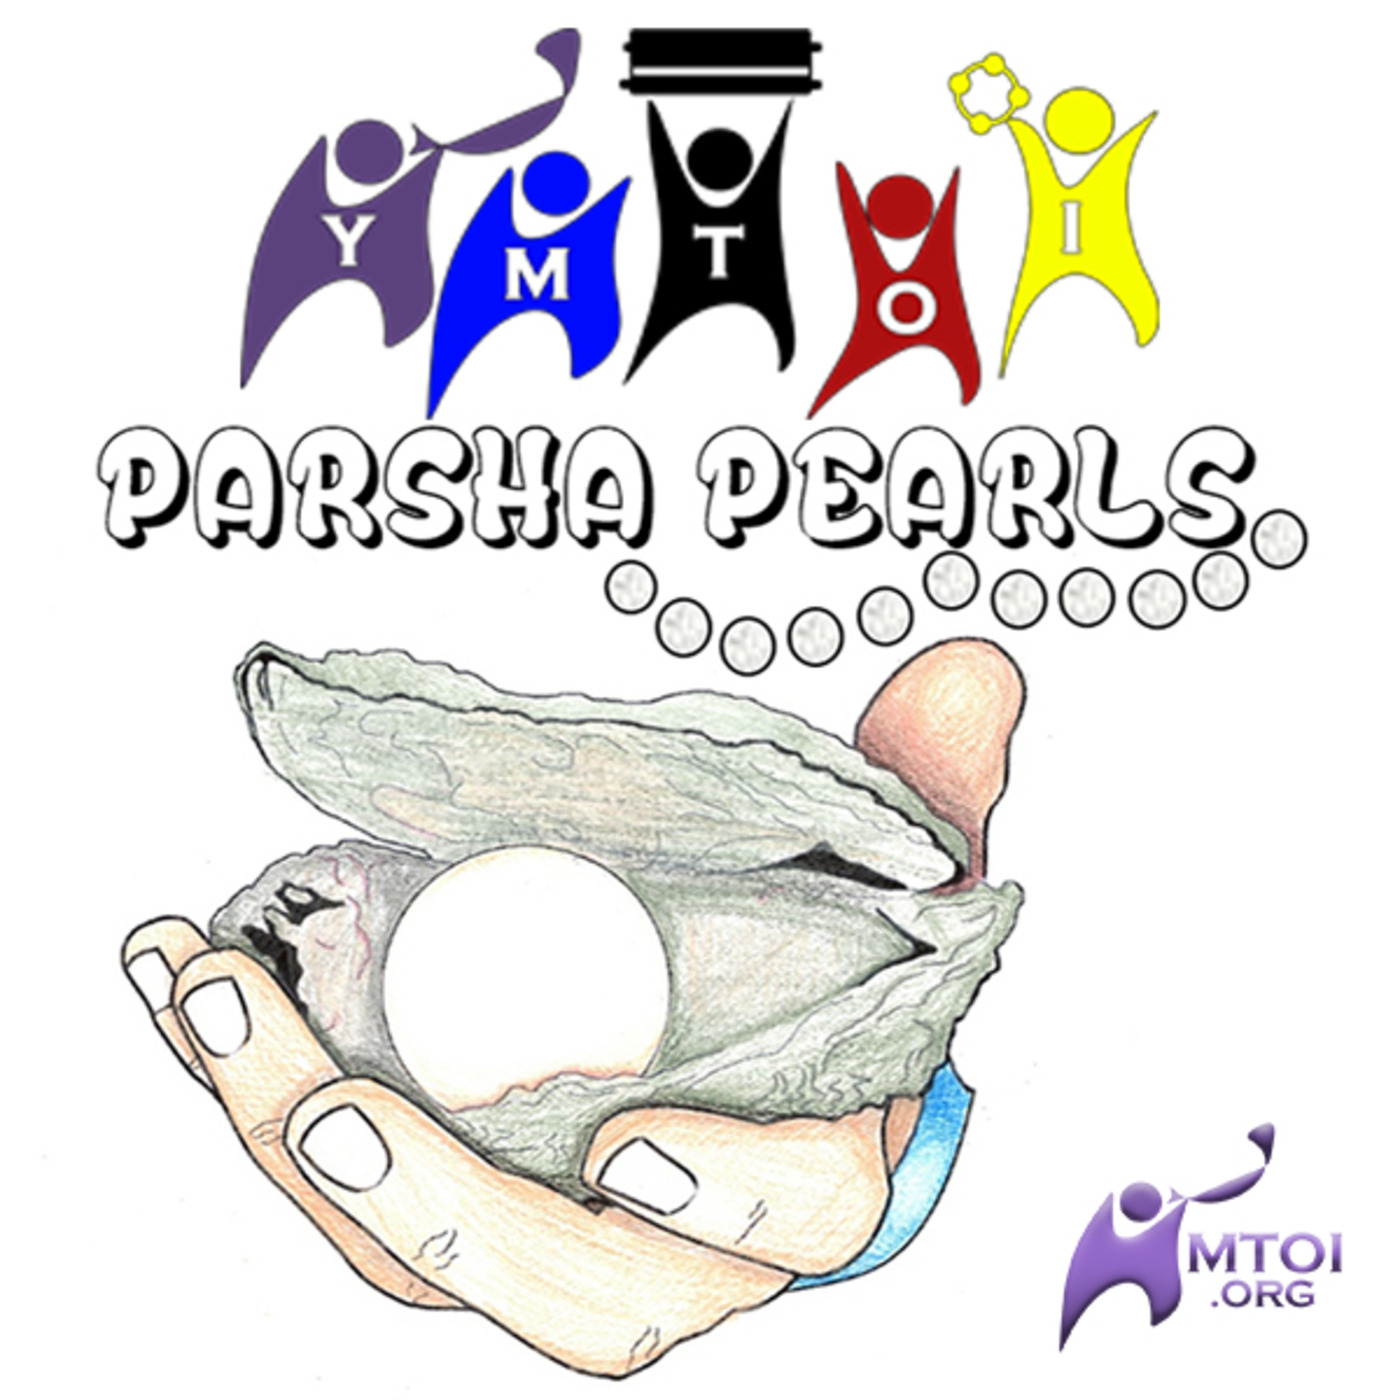 Episode 932: YMTOI Parsha Pearls - 22.1 Vayak’hel ”If Your Heart Is Lifted Up”